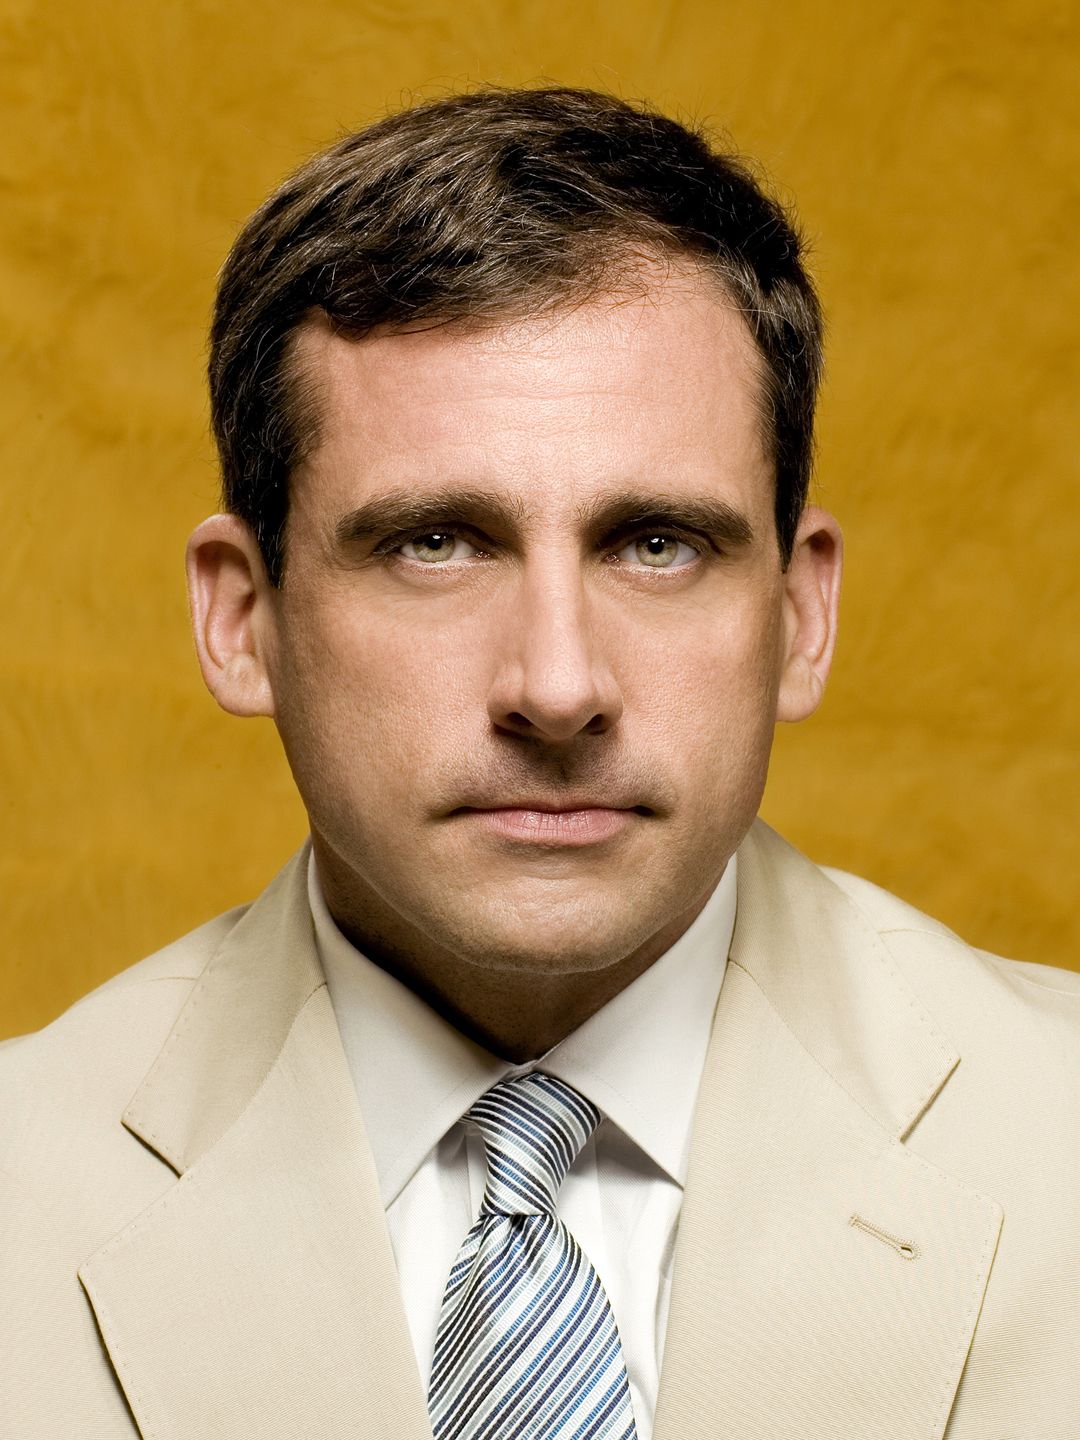 Steve Carell place of birth